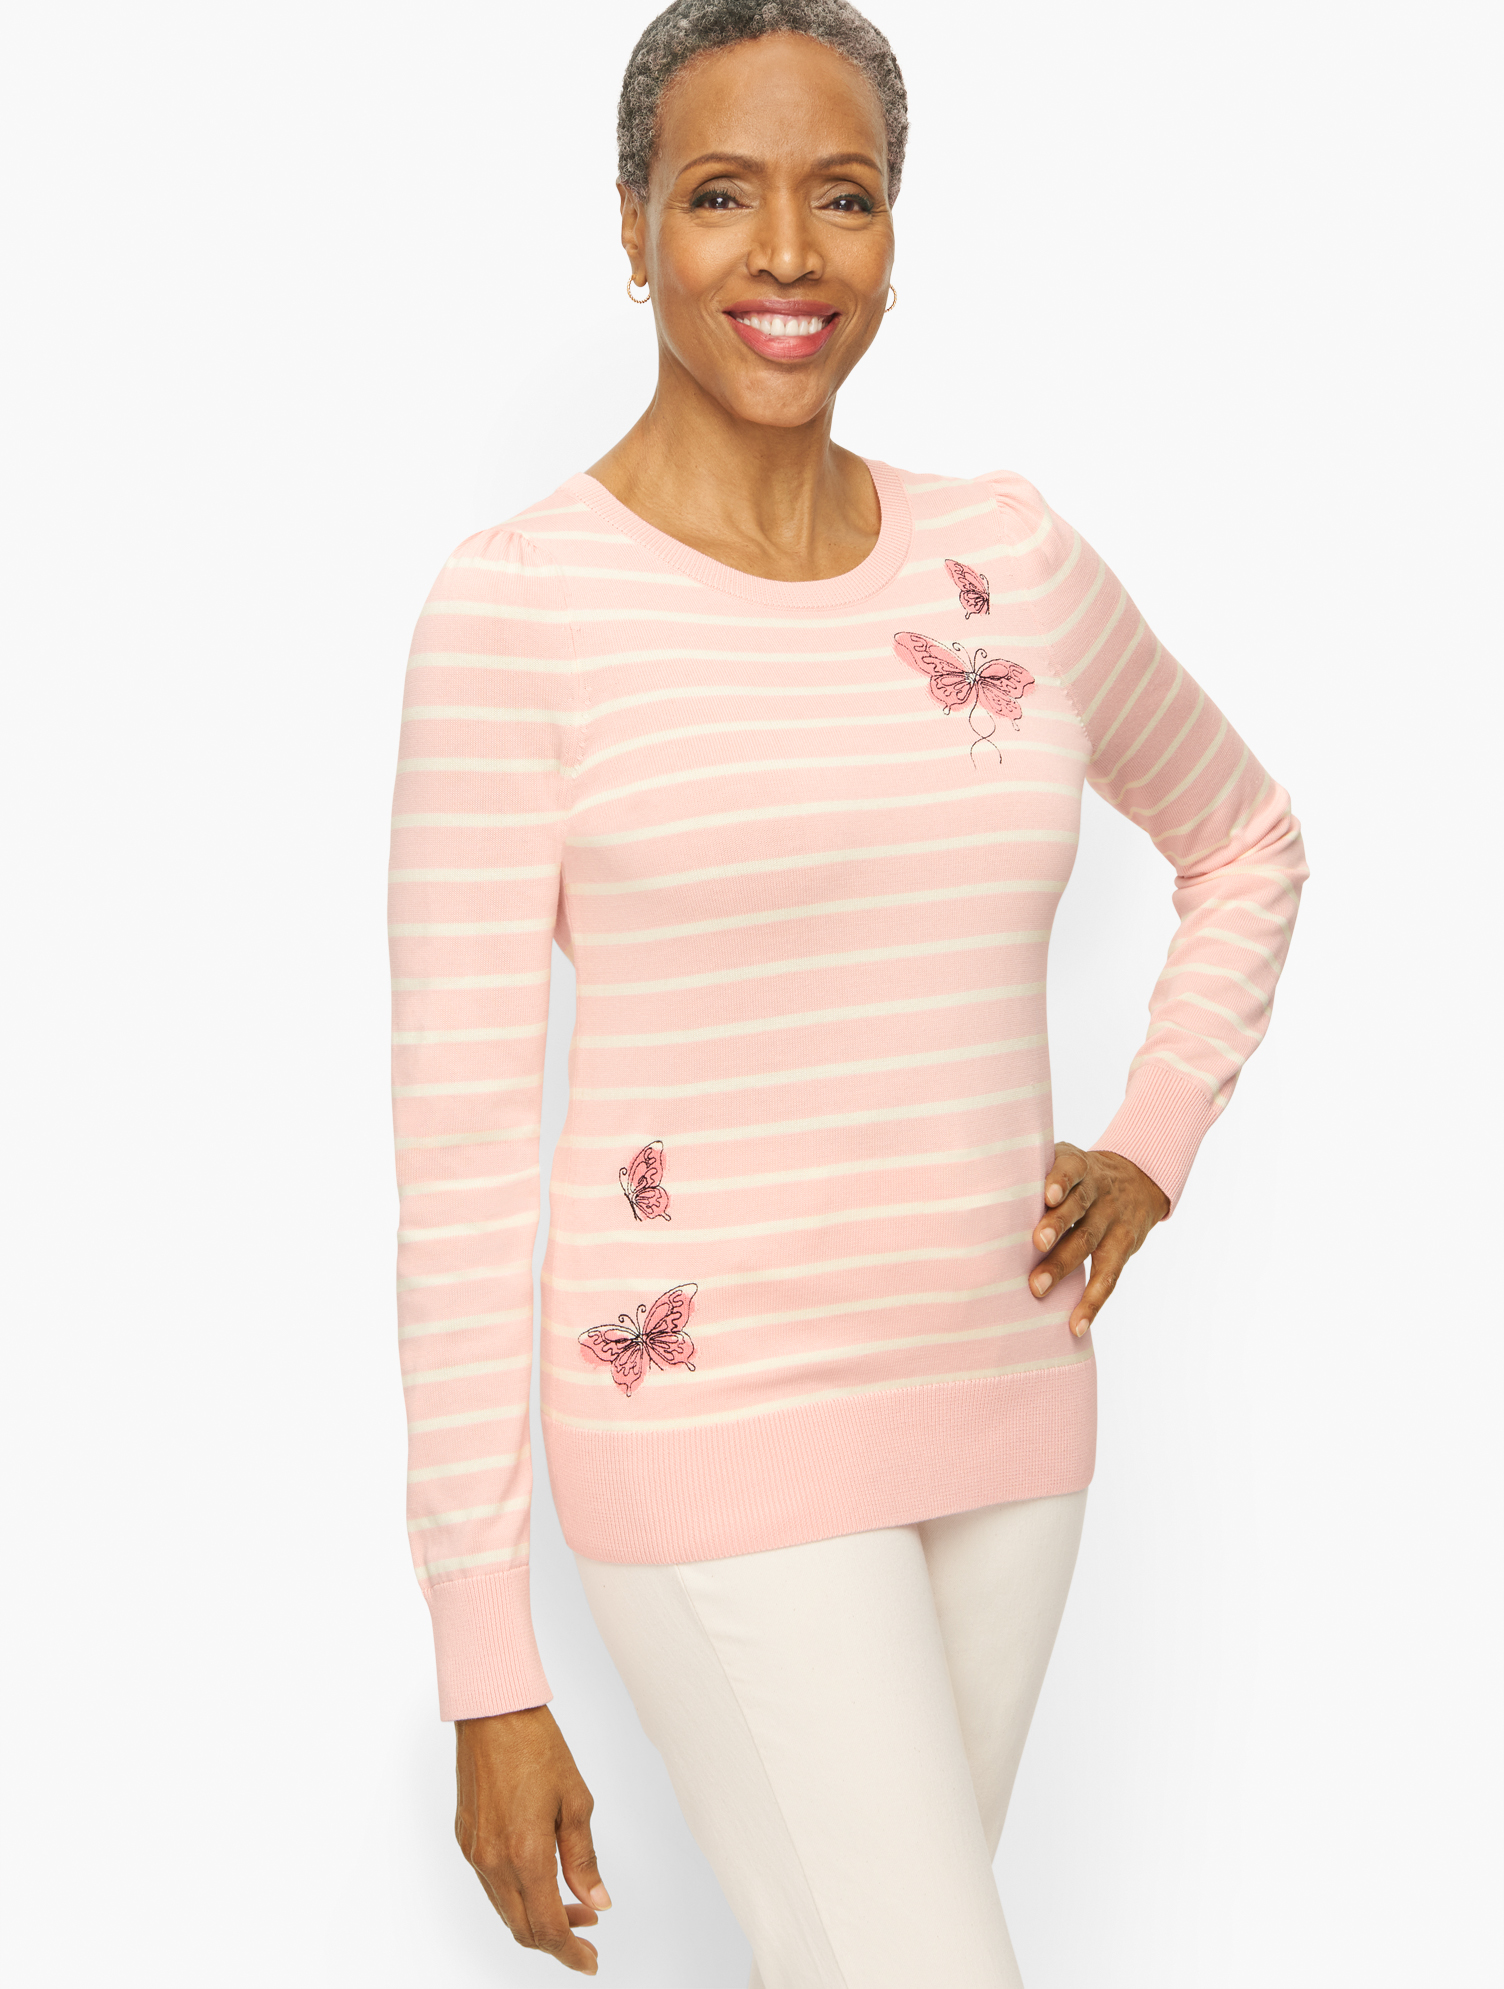 Talbots Plus Size - Crewneck Sweater - Embroidered Butterfly Stripe - Caspian Pink/ivory - 2x  In Caspian Pink,ivory